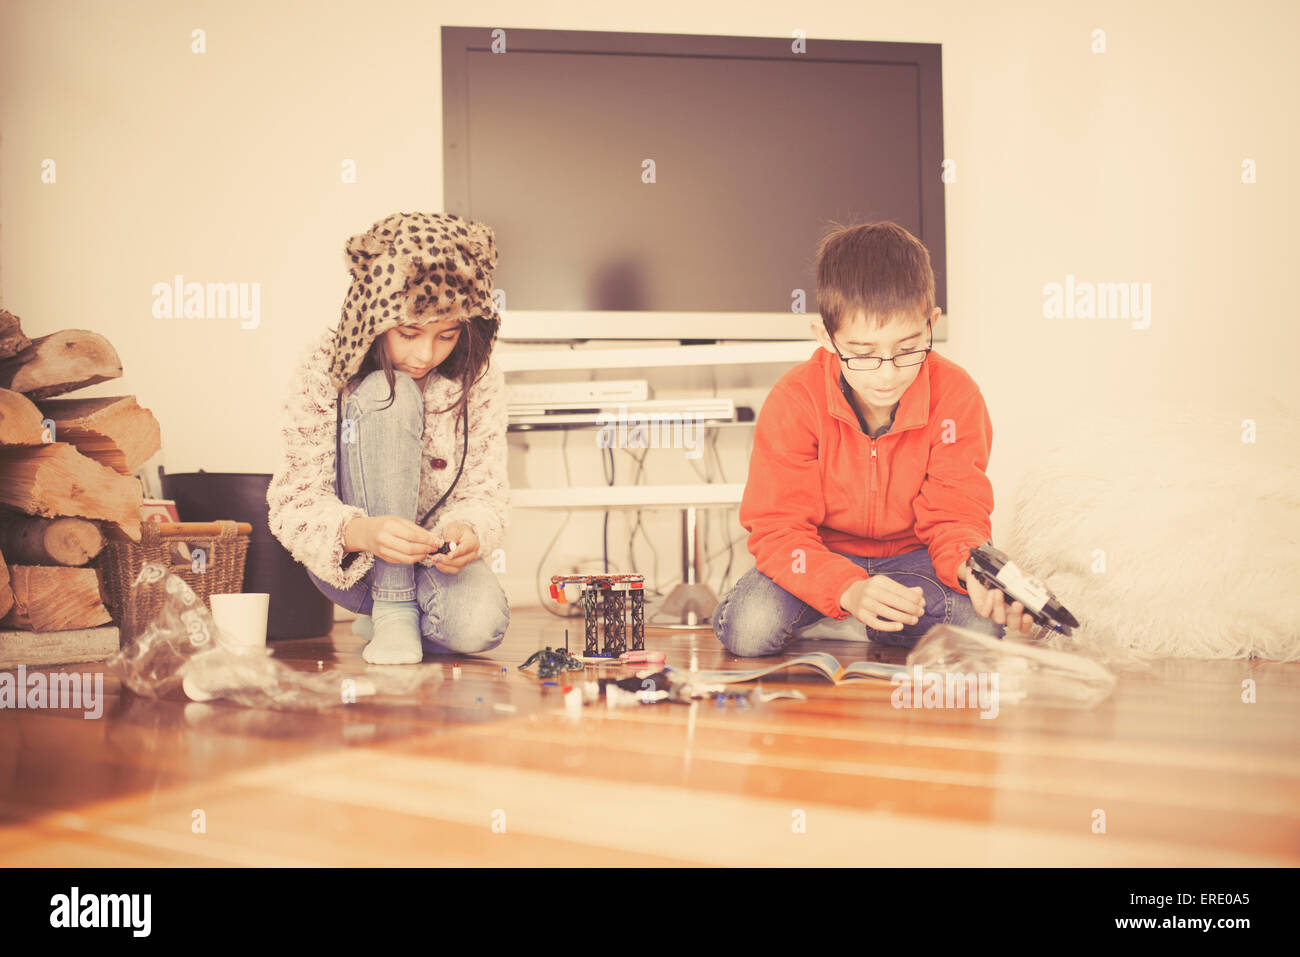 Mixed race brother and sister playing on living room floor Stock Photo